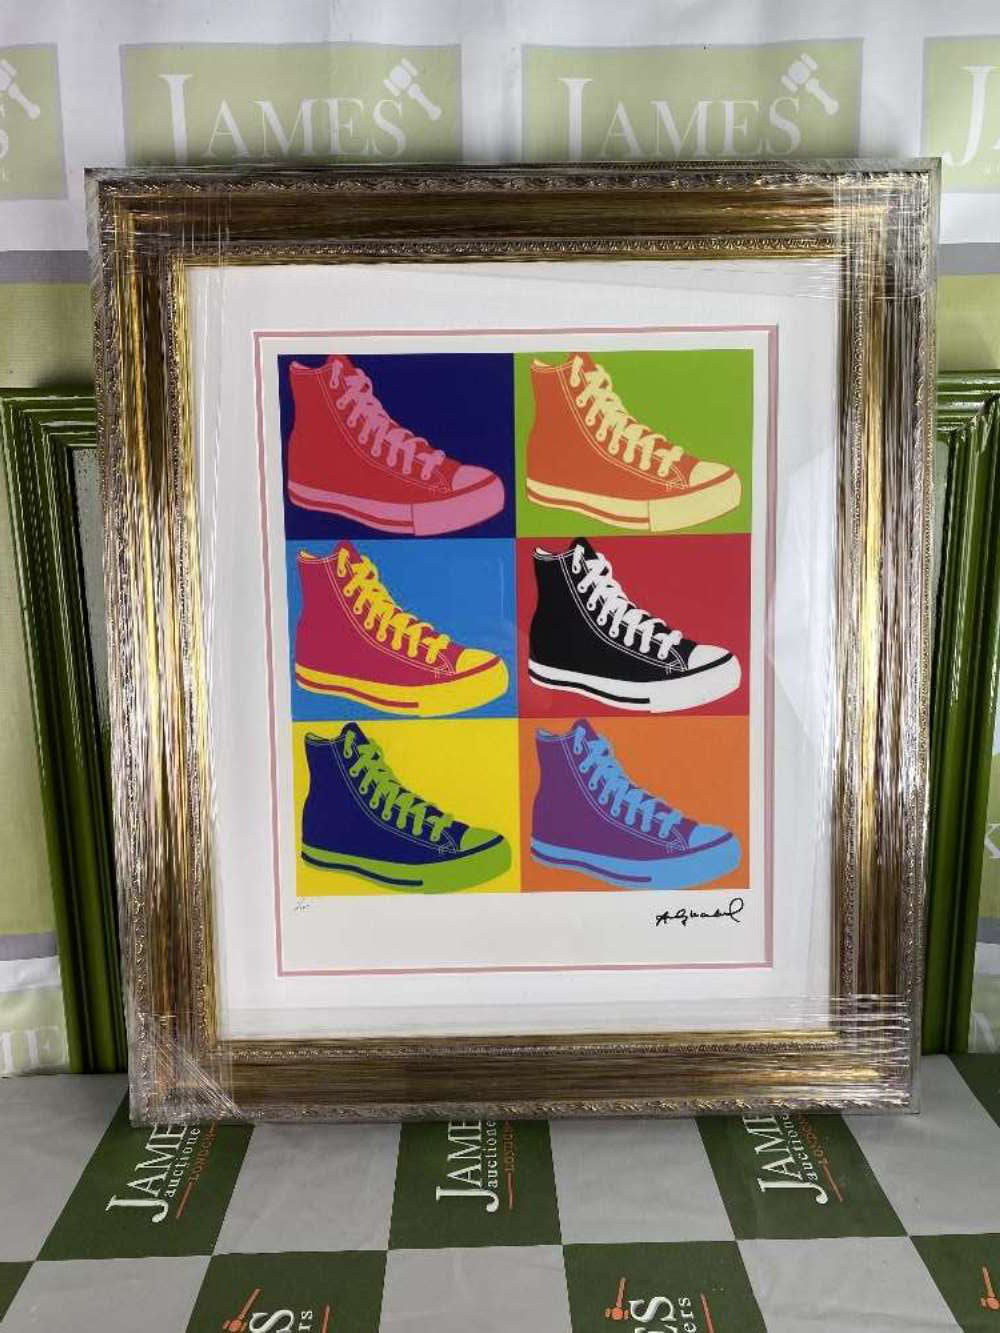 Andy Warhol (1928-1987) “Converse” Numbered #1/100 Lithograph, Ornate Framed. - Image 7 of 7